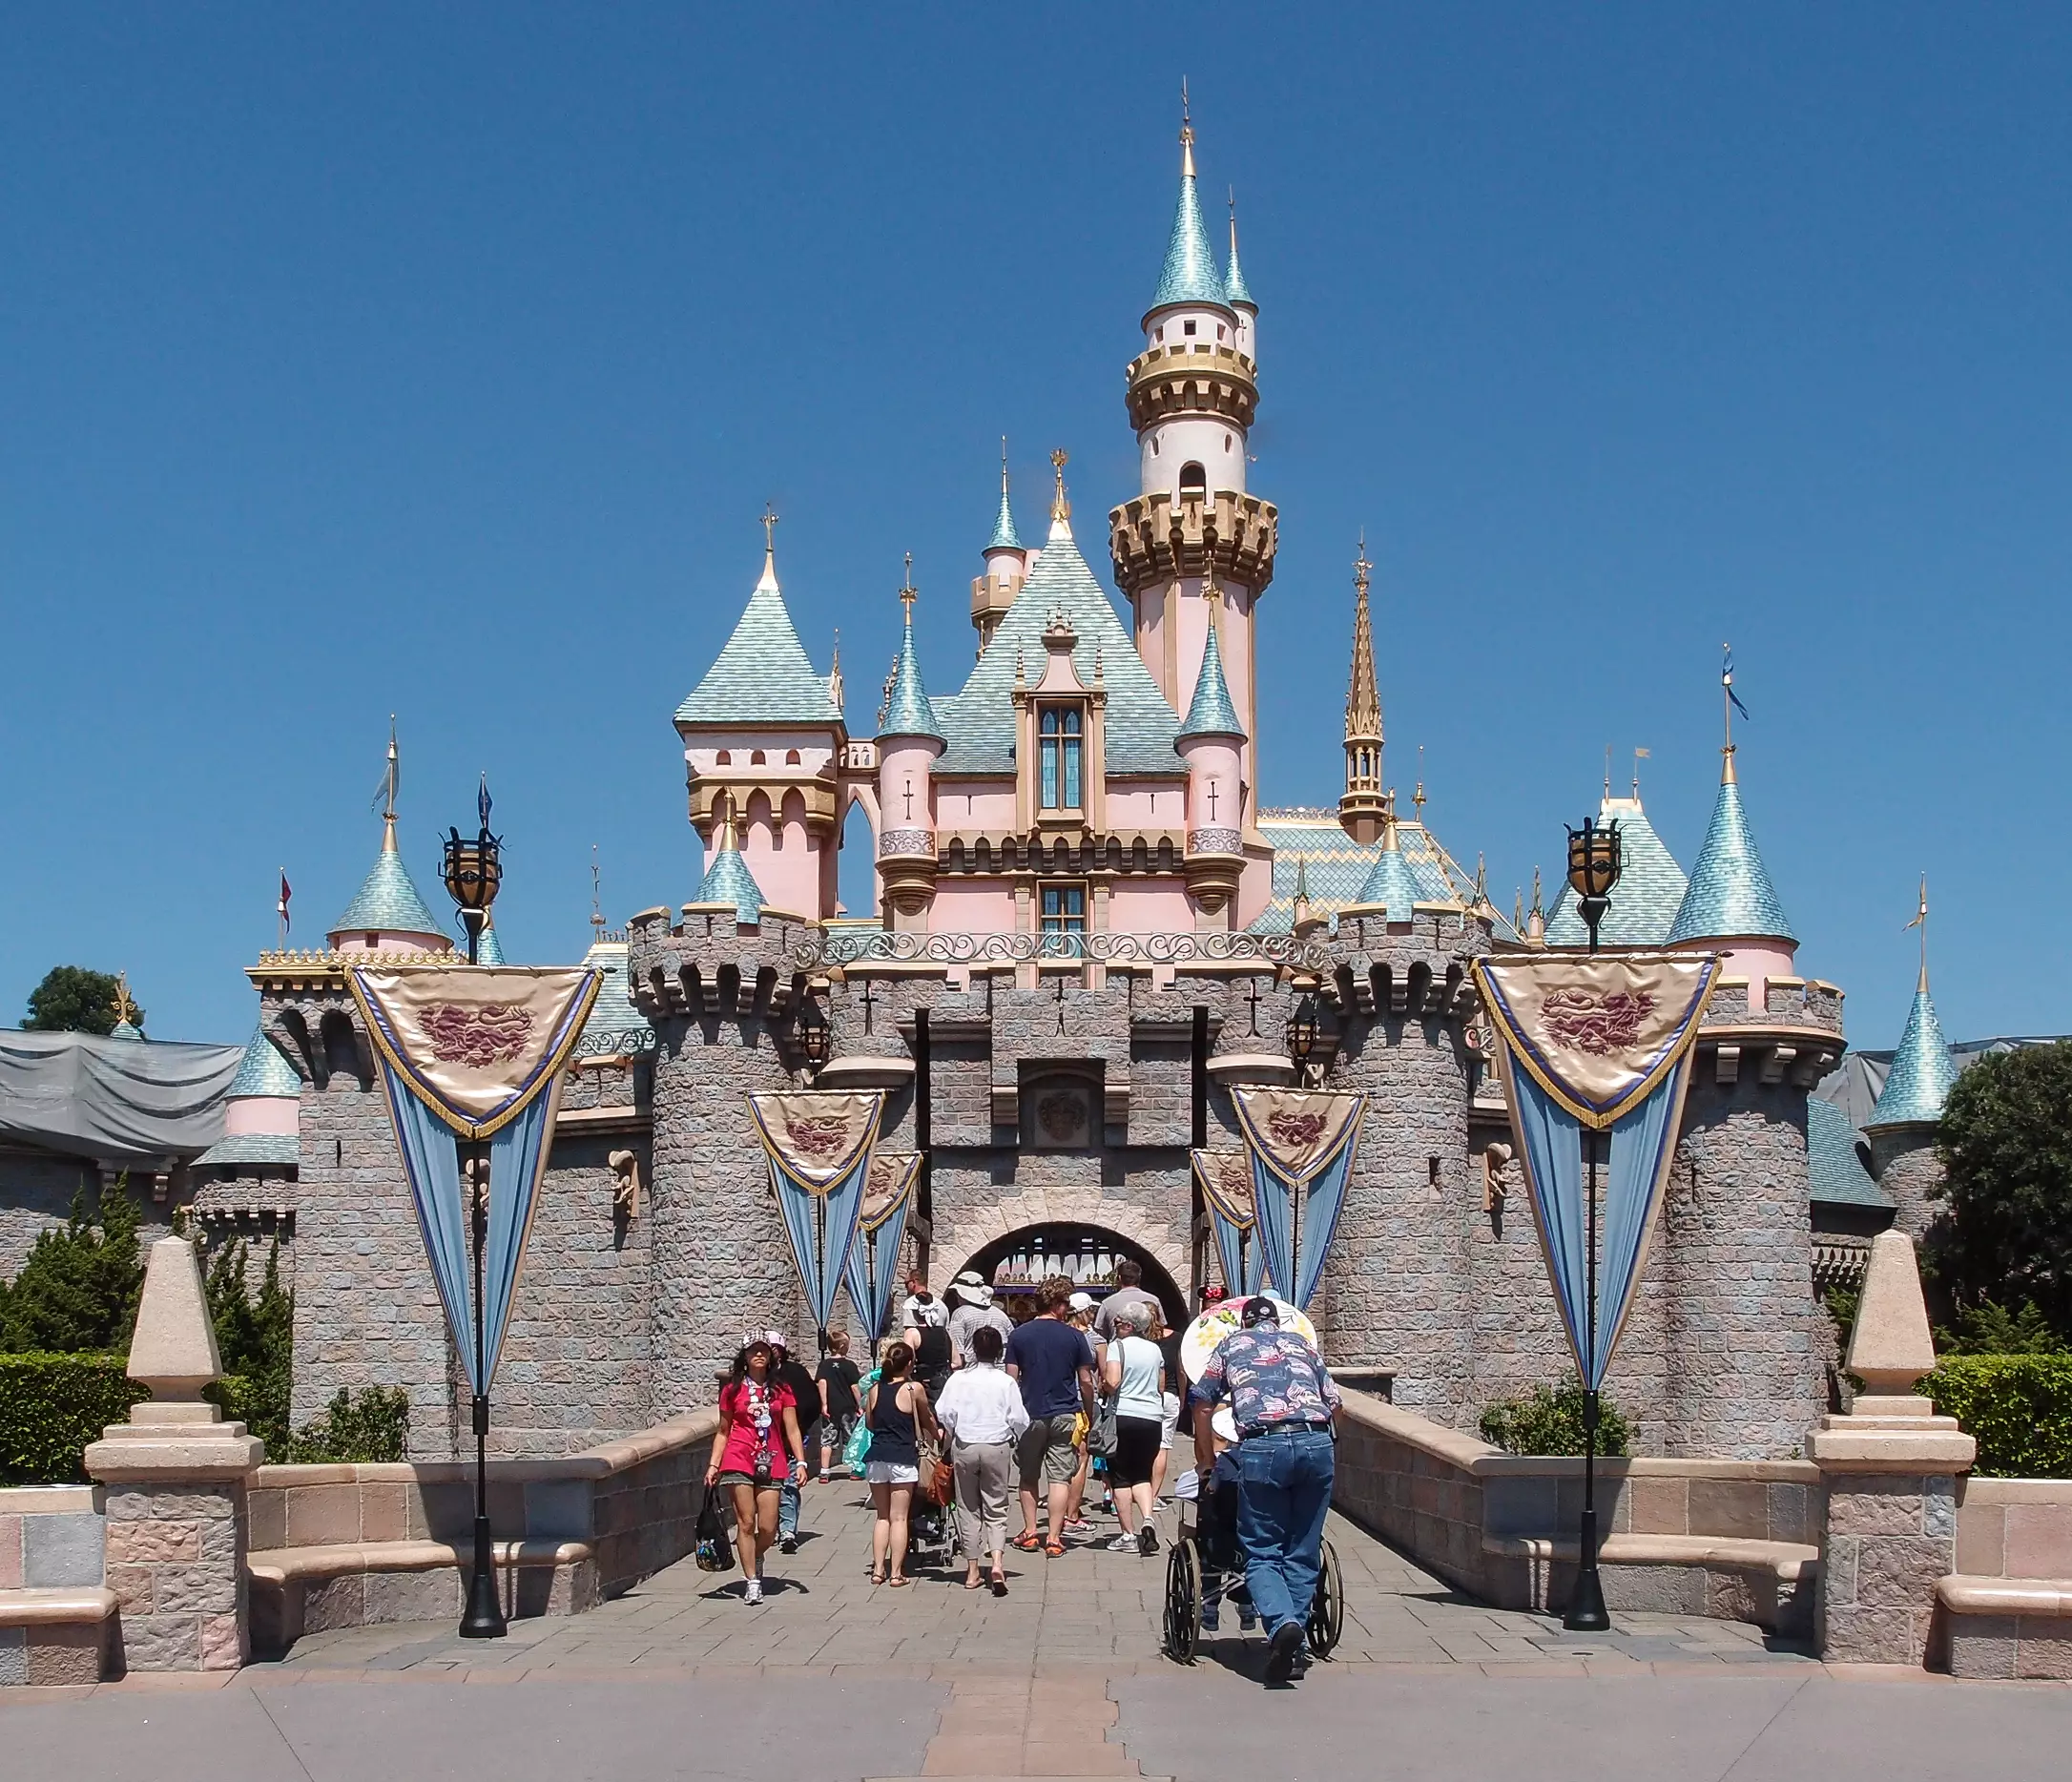 The Sleeping Beauty castle in Anaheim California's Disneyland Park was opened to the public in 1955 (